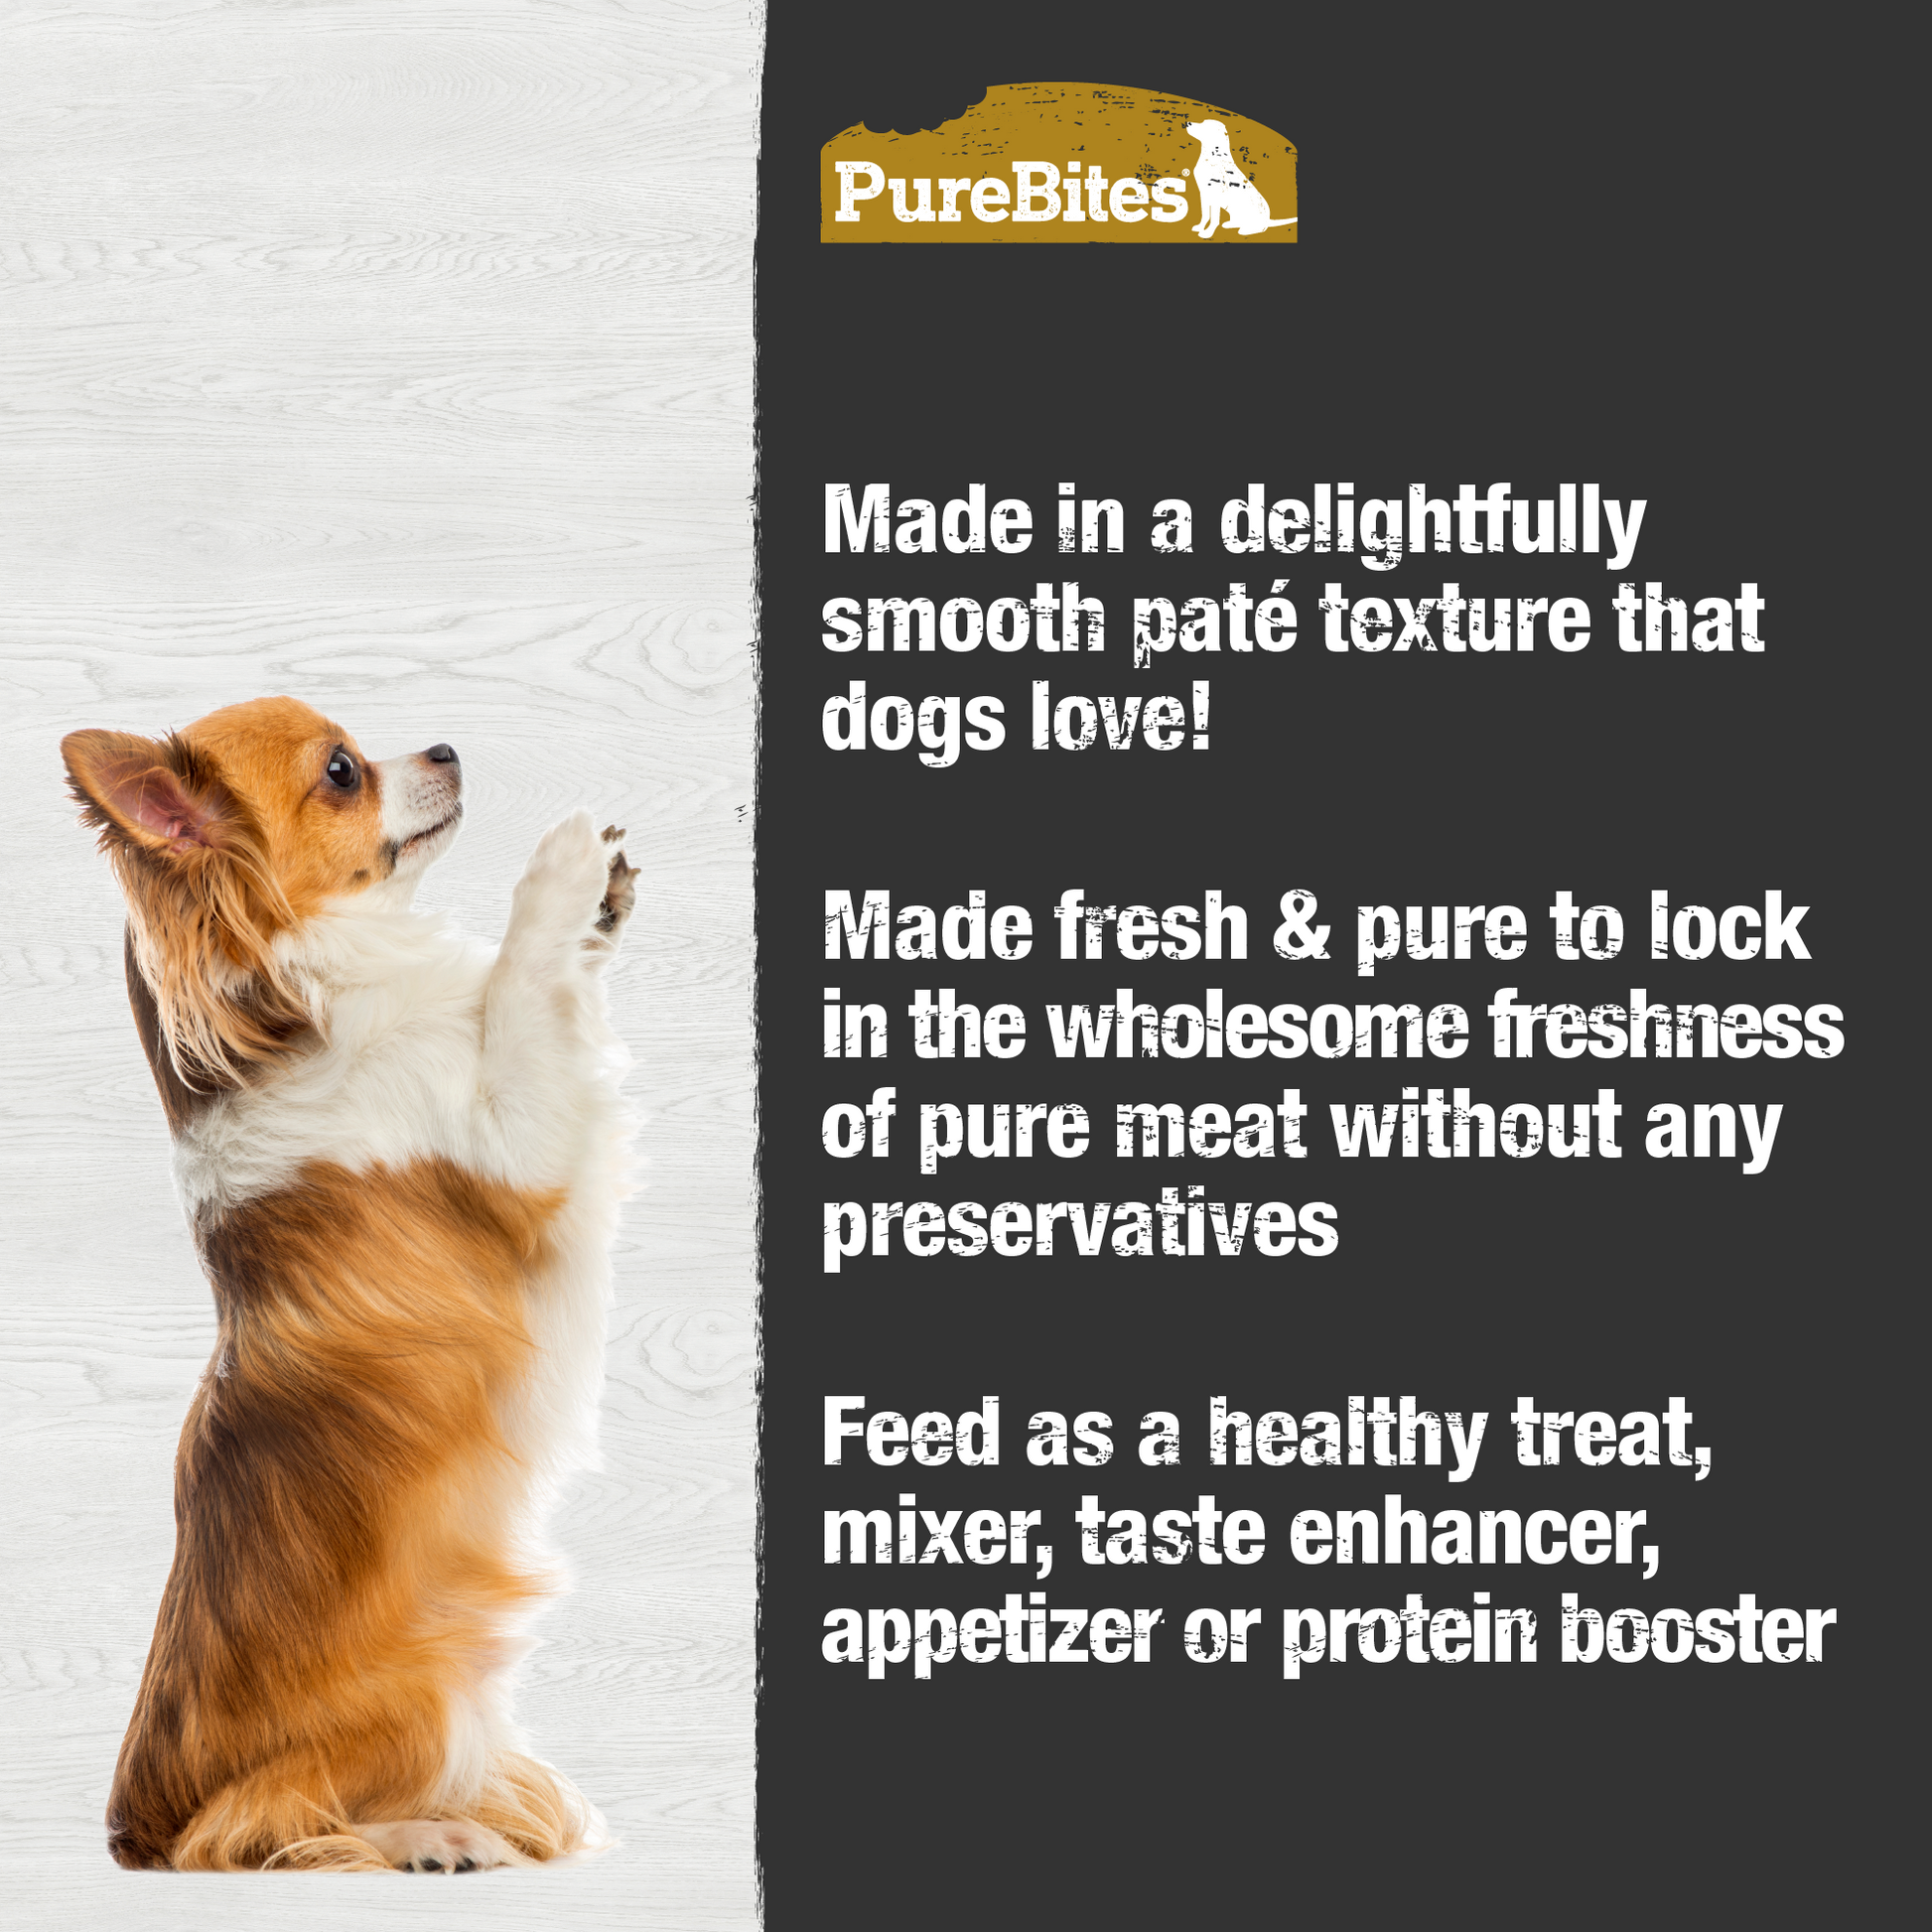 Made fresh & pure means more protein and nutrients packed into every can. The chicken & pumpkin in our patés is delicately steamed to help preserve the ingredient's taste, and nutrition, and mirror a dog’s ancestral diet